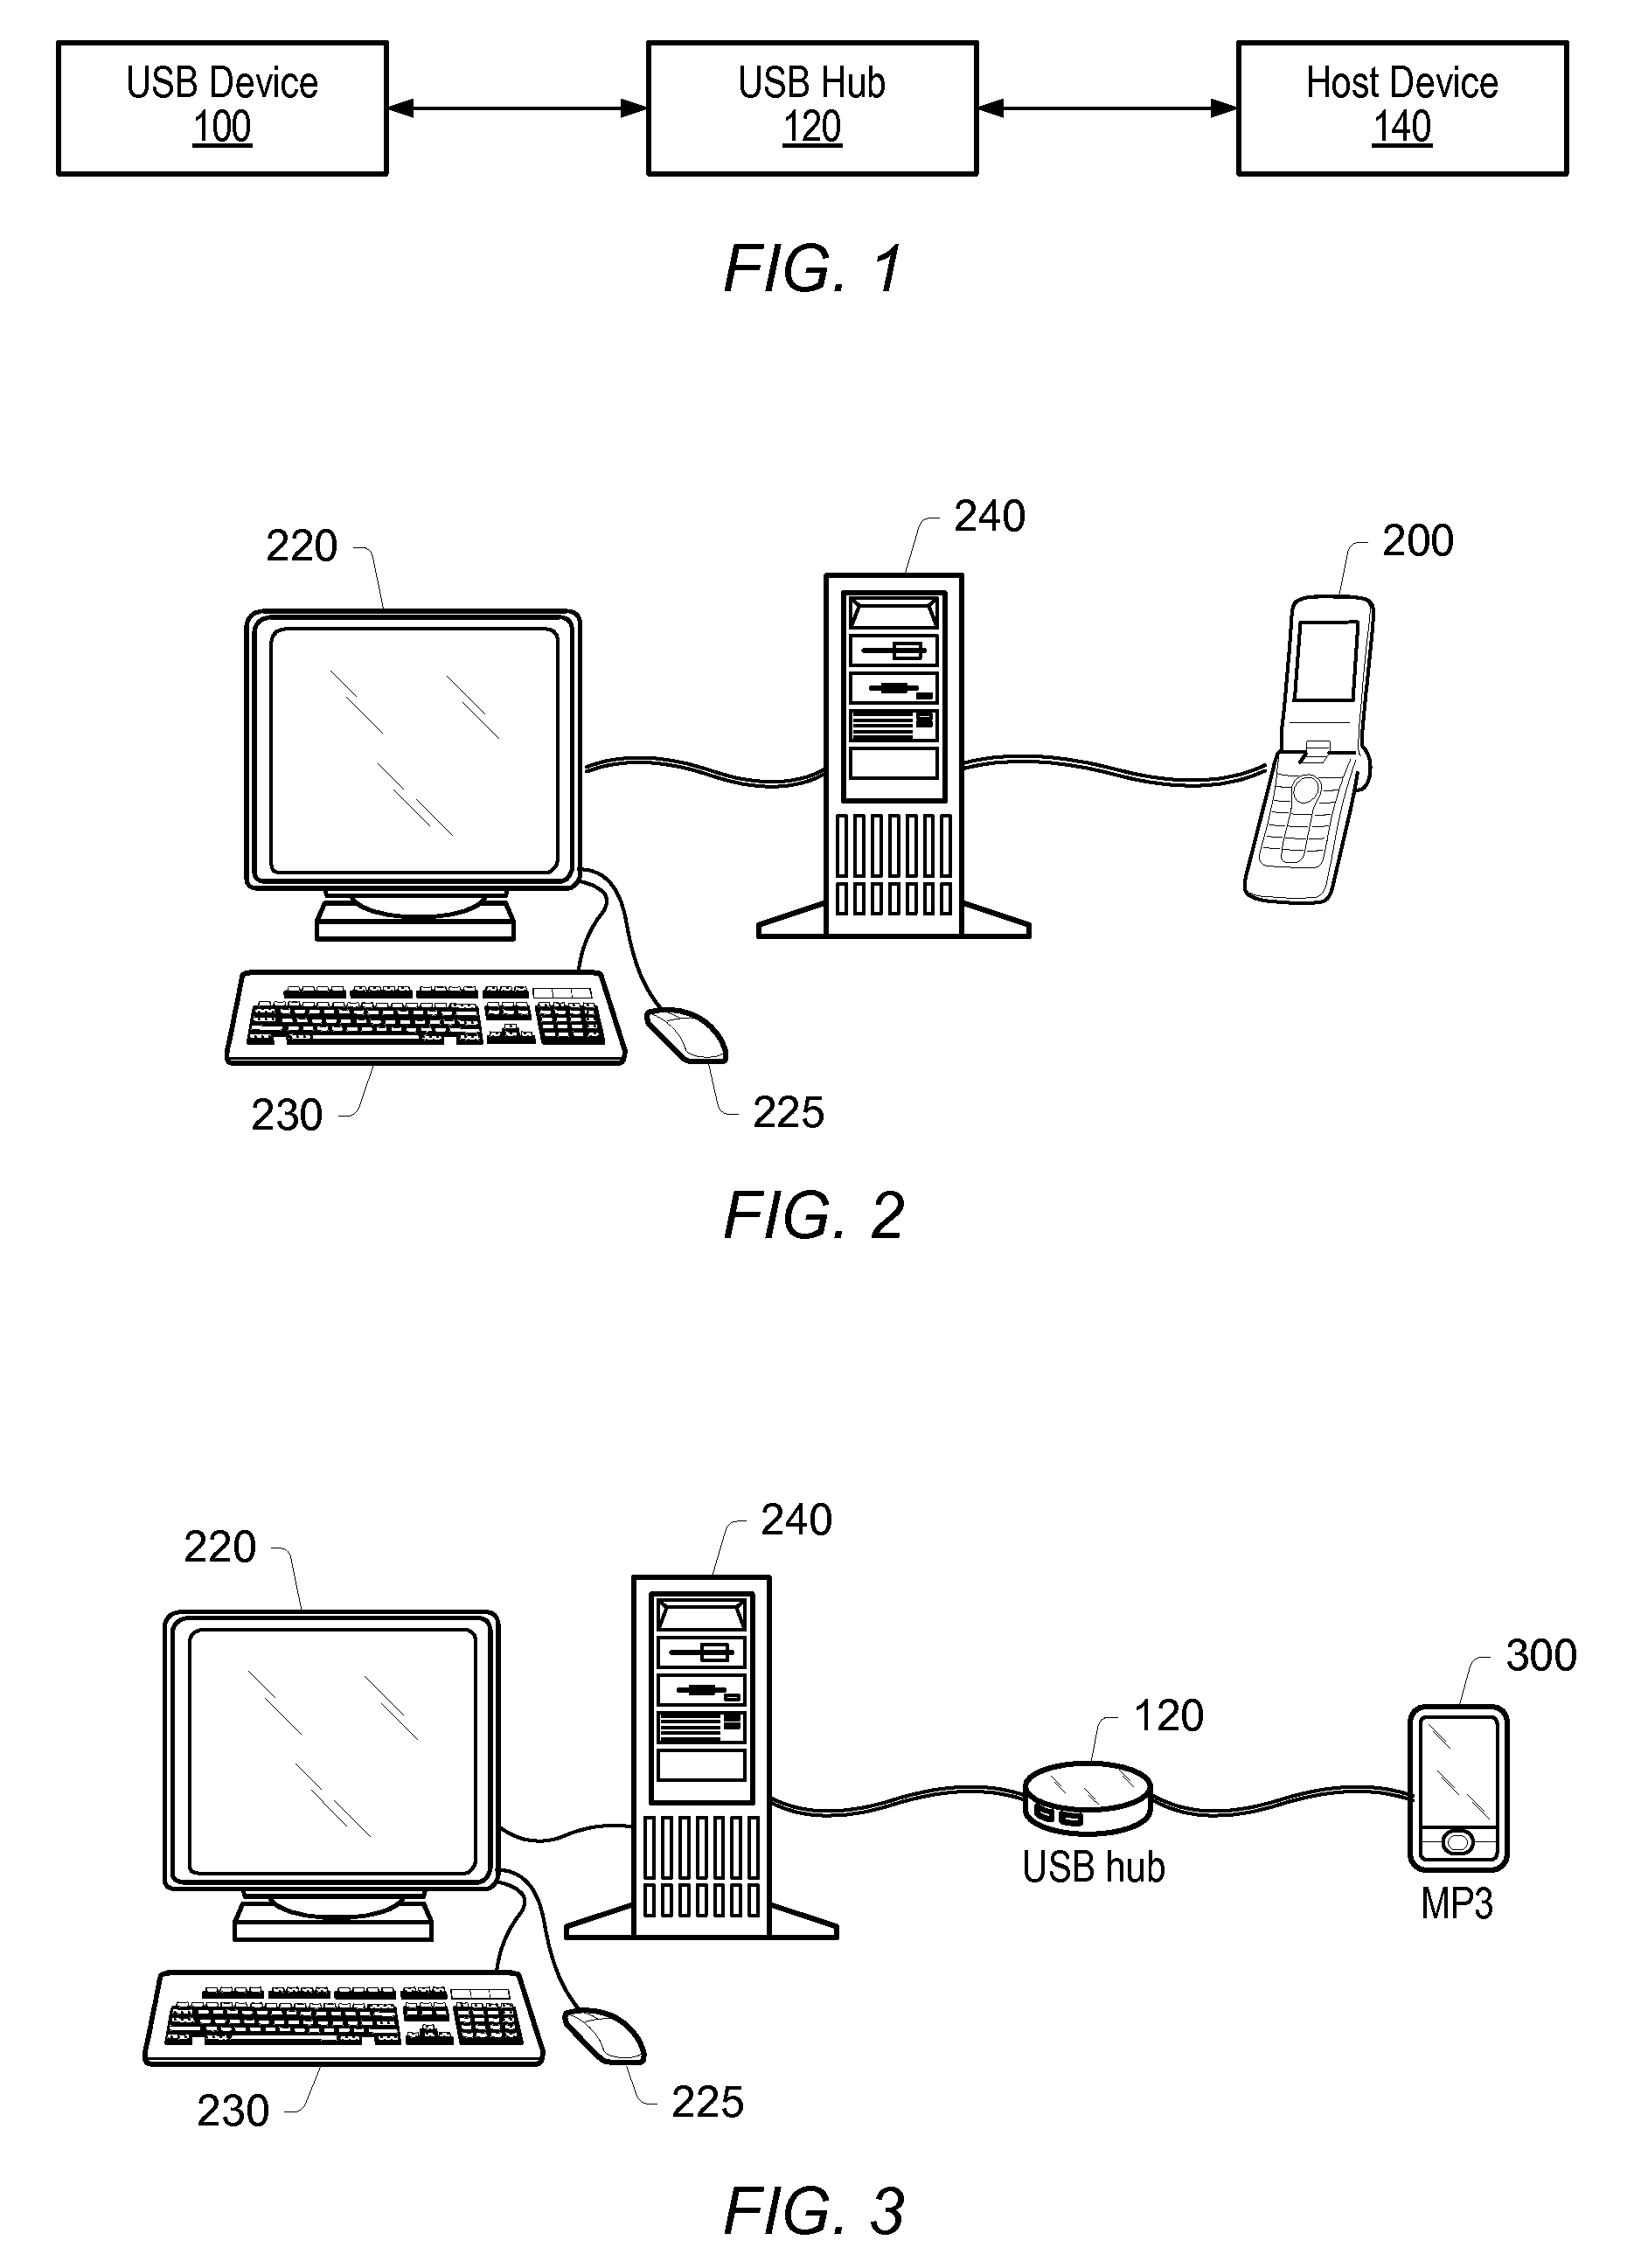 System and method for enumerating a USB device using low power